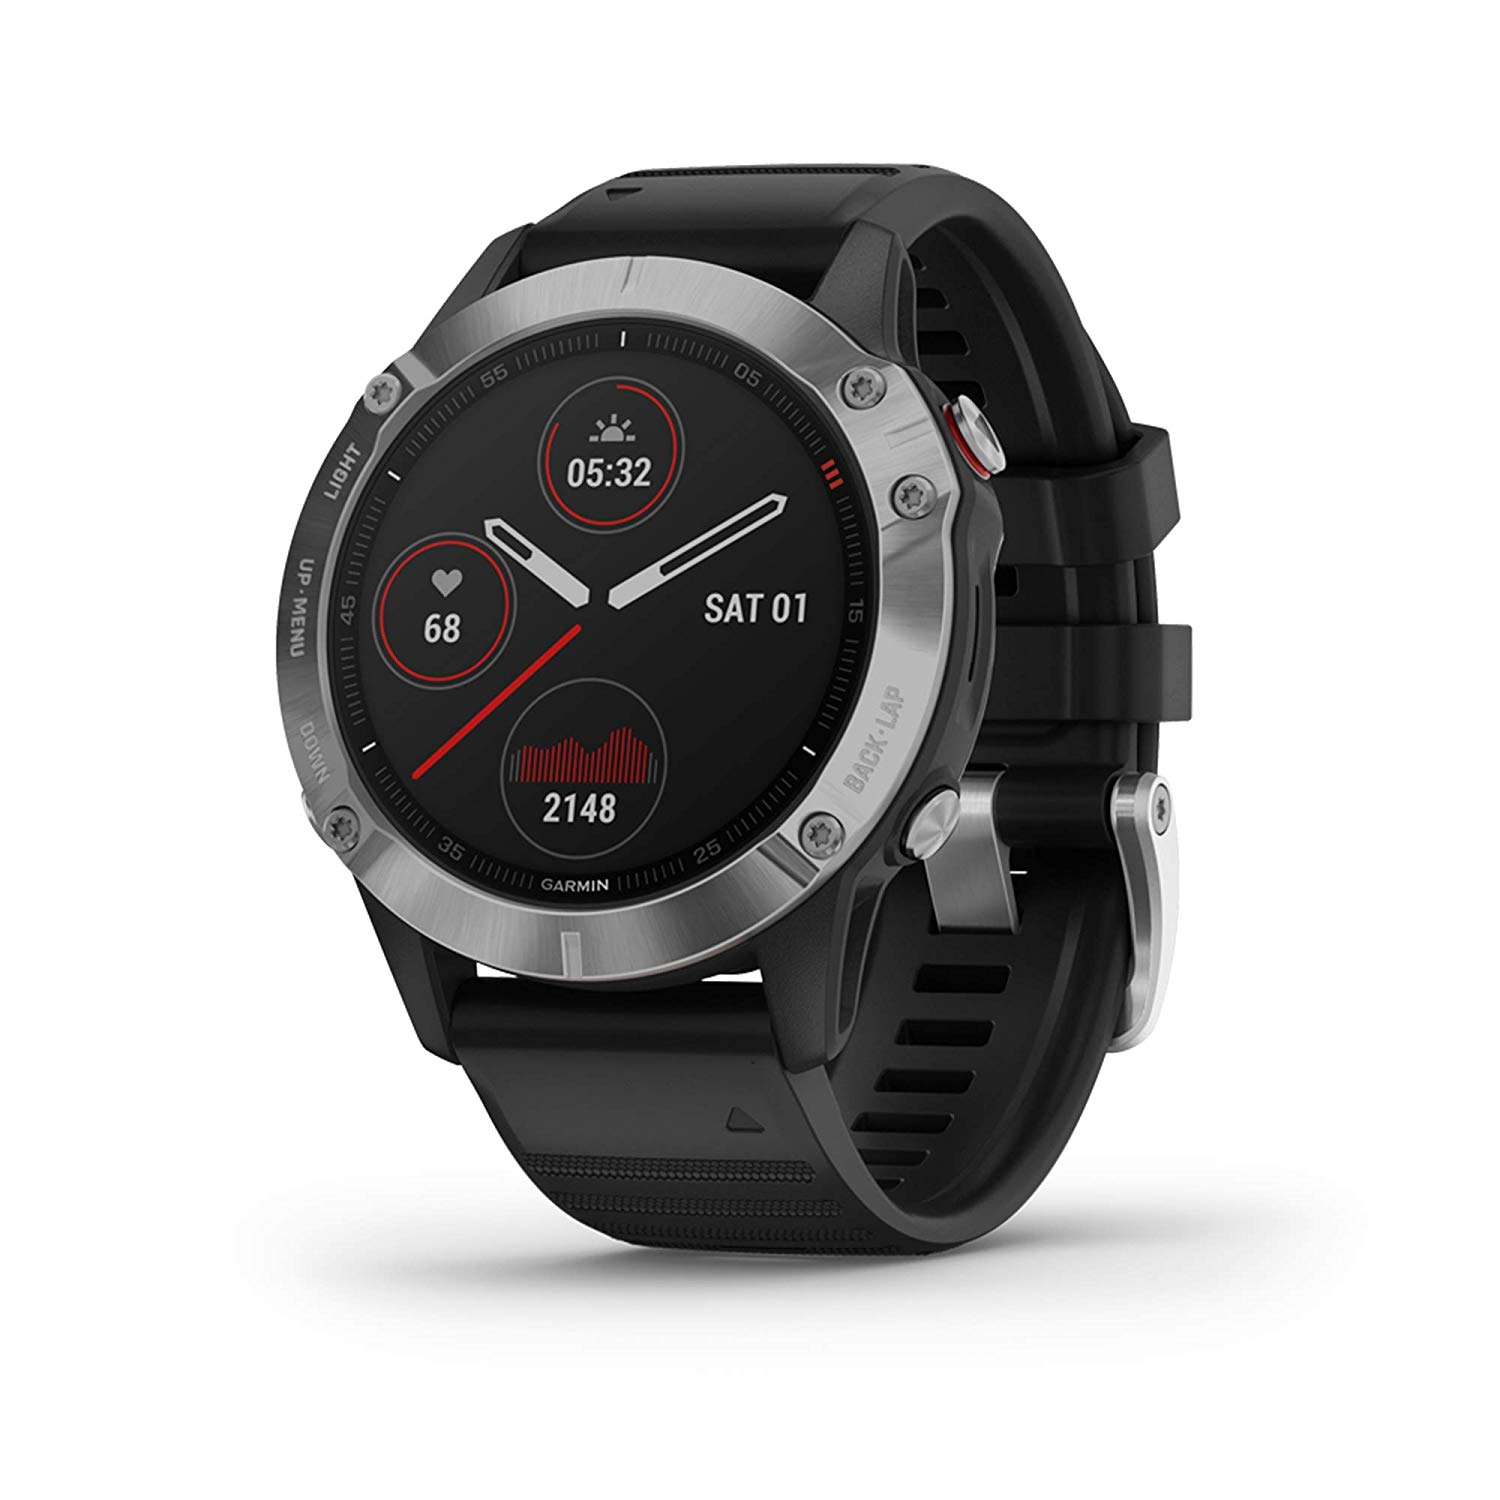 Garmin Fenix 6 Full Specifications and Features